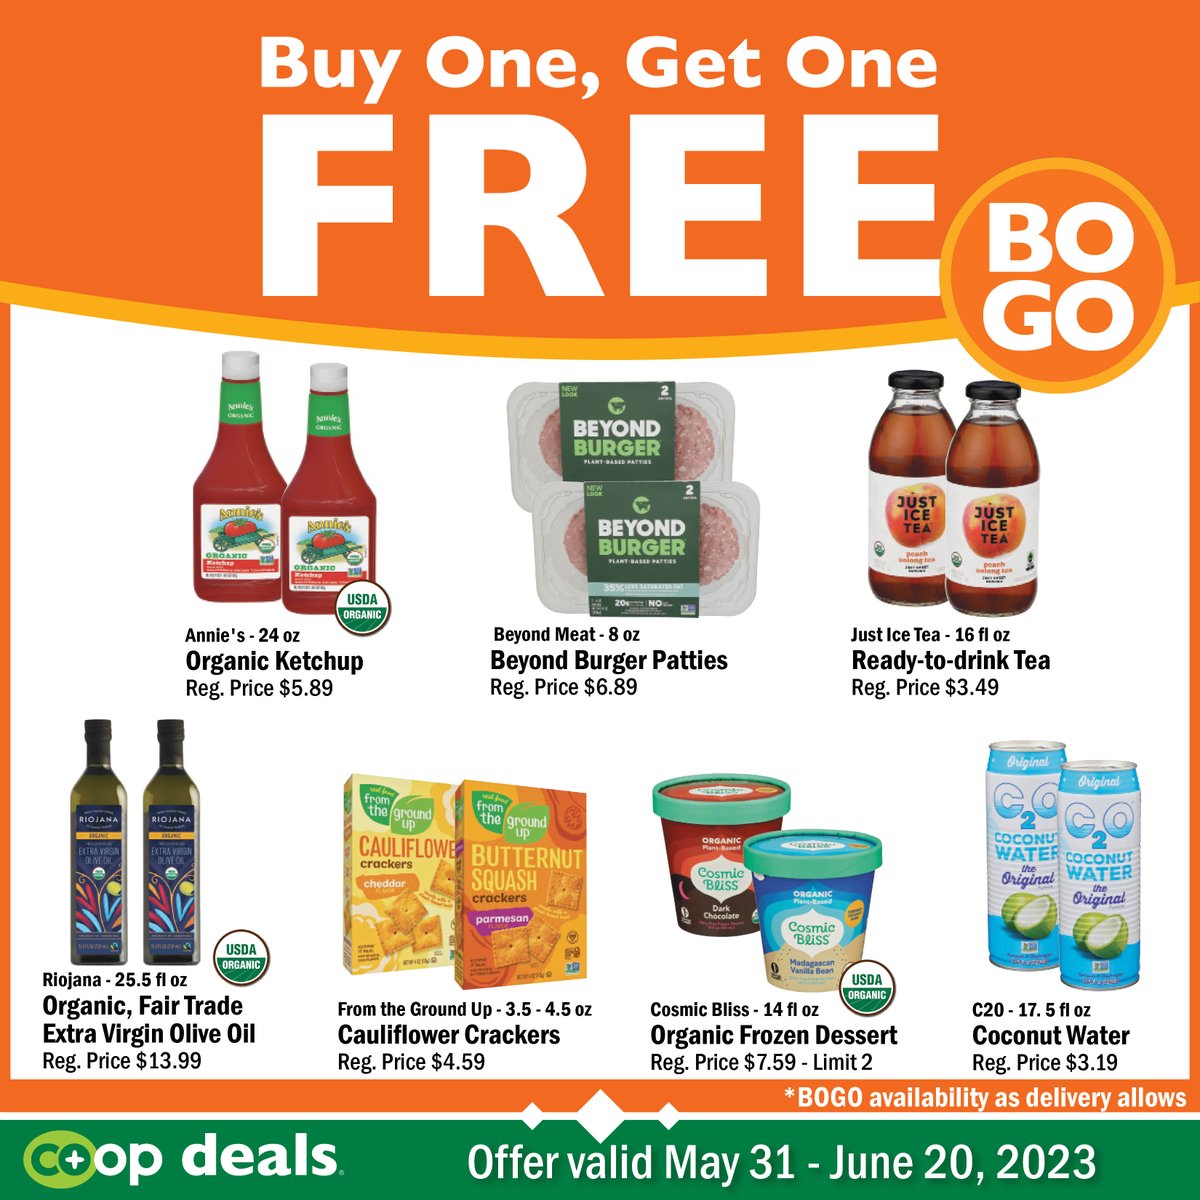 Current BOGO savings run through June 20! Your Co-op is open 9 a.m. to 8 p.m. daily in beautiful downtown Decorah. #ways2save #shopcoop #oneotacoop #foodcoop #decorah